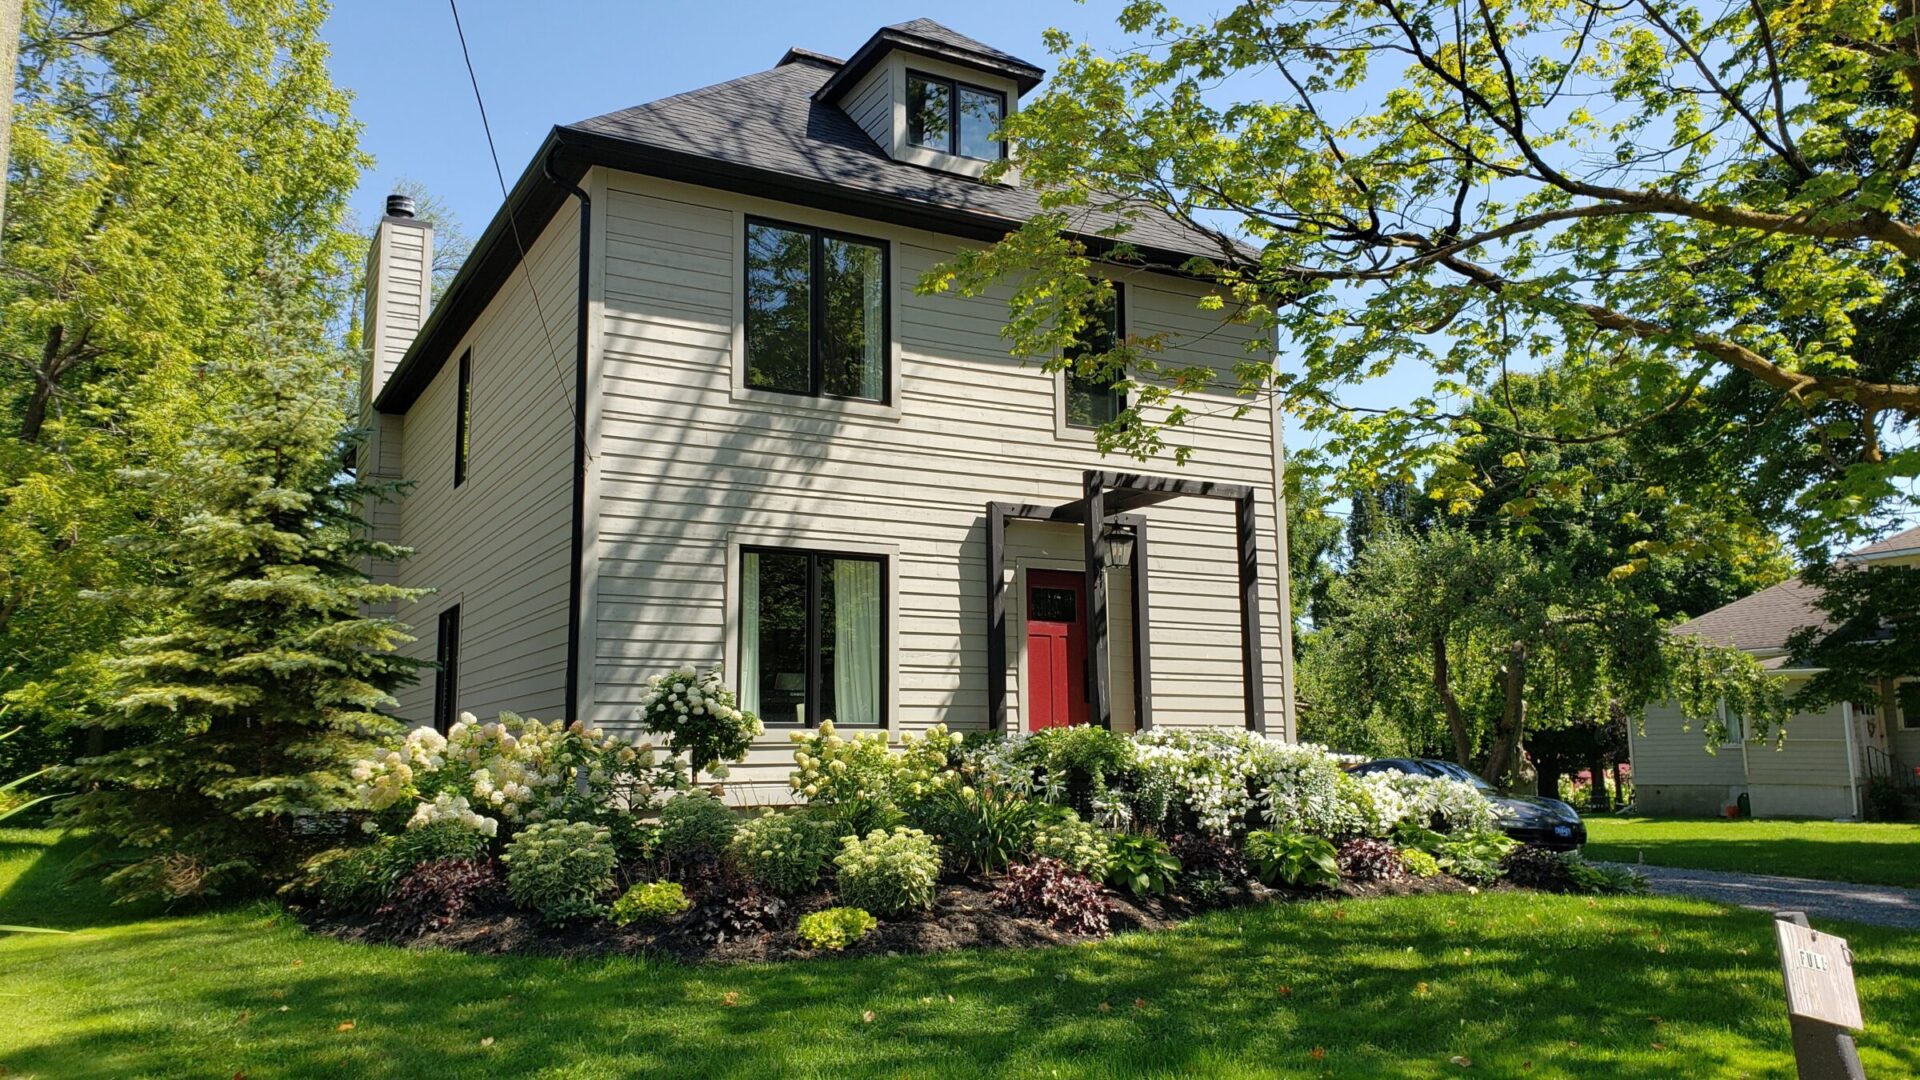 A two-story house with beige siding and a red door surrounded by lush greenery and hydrangea bushes under a clear blue sky.